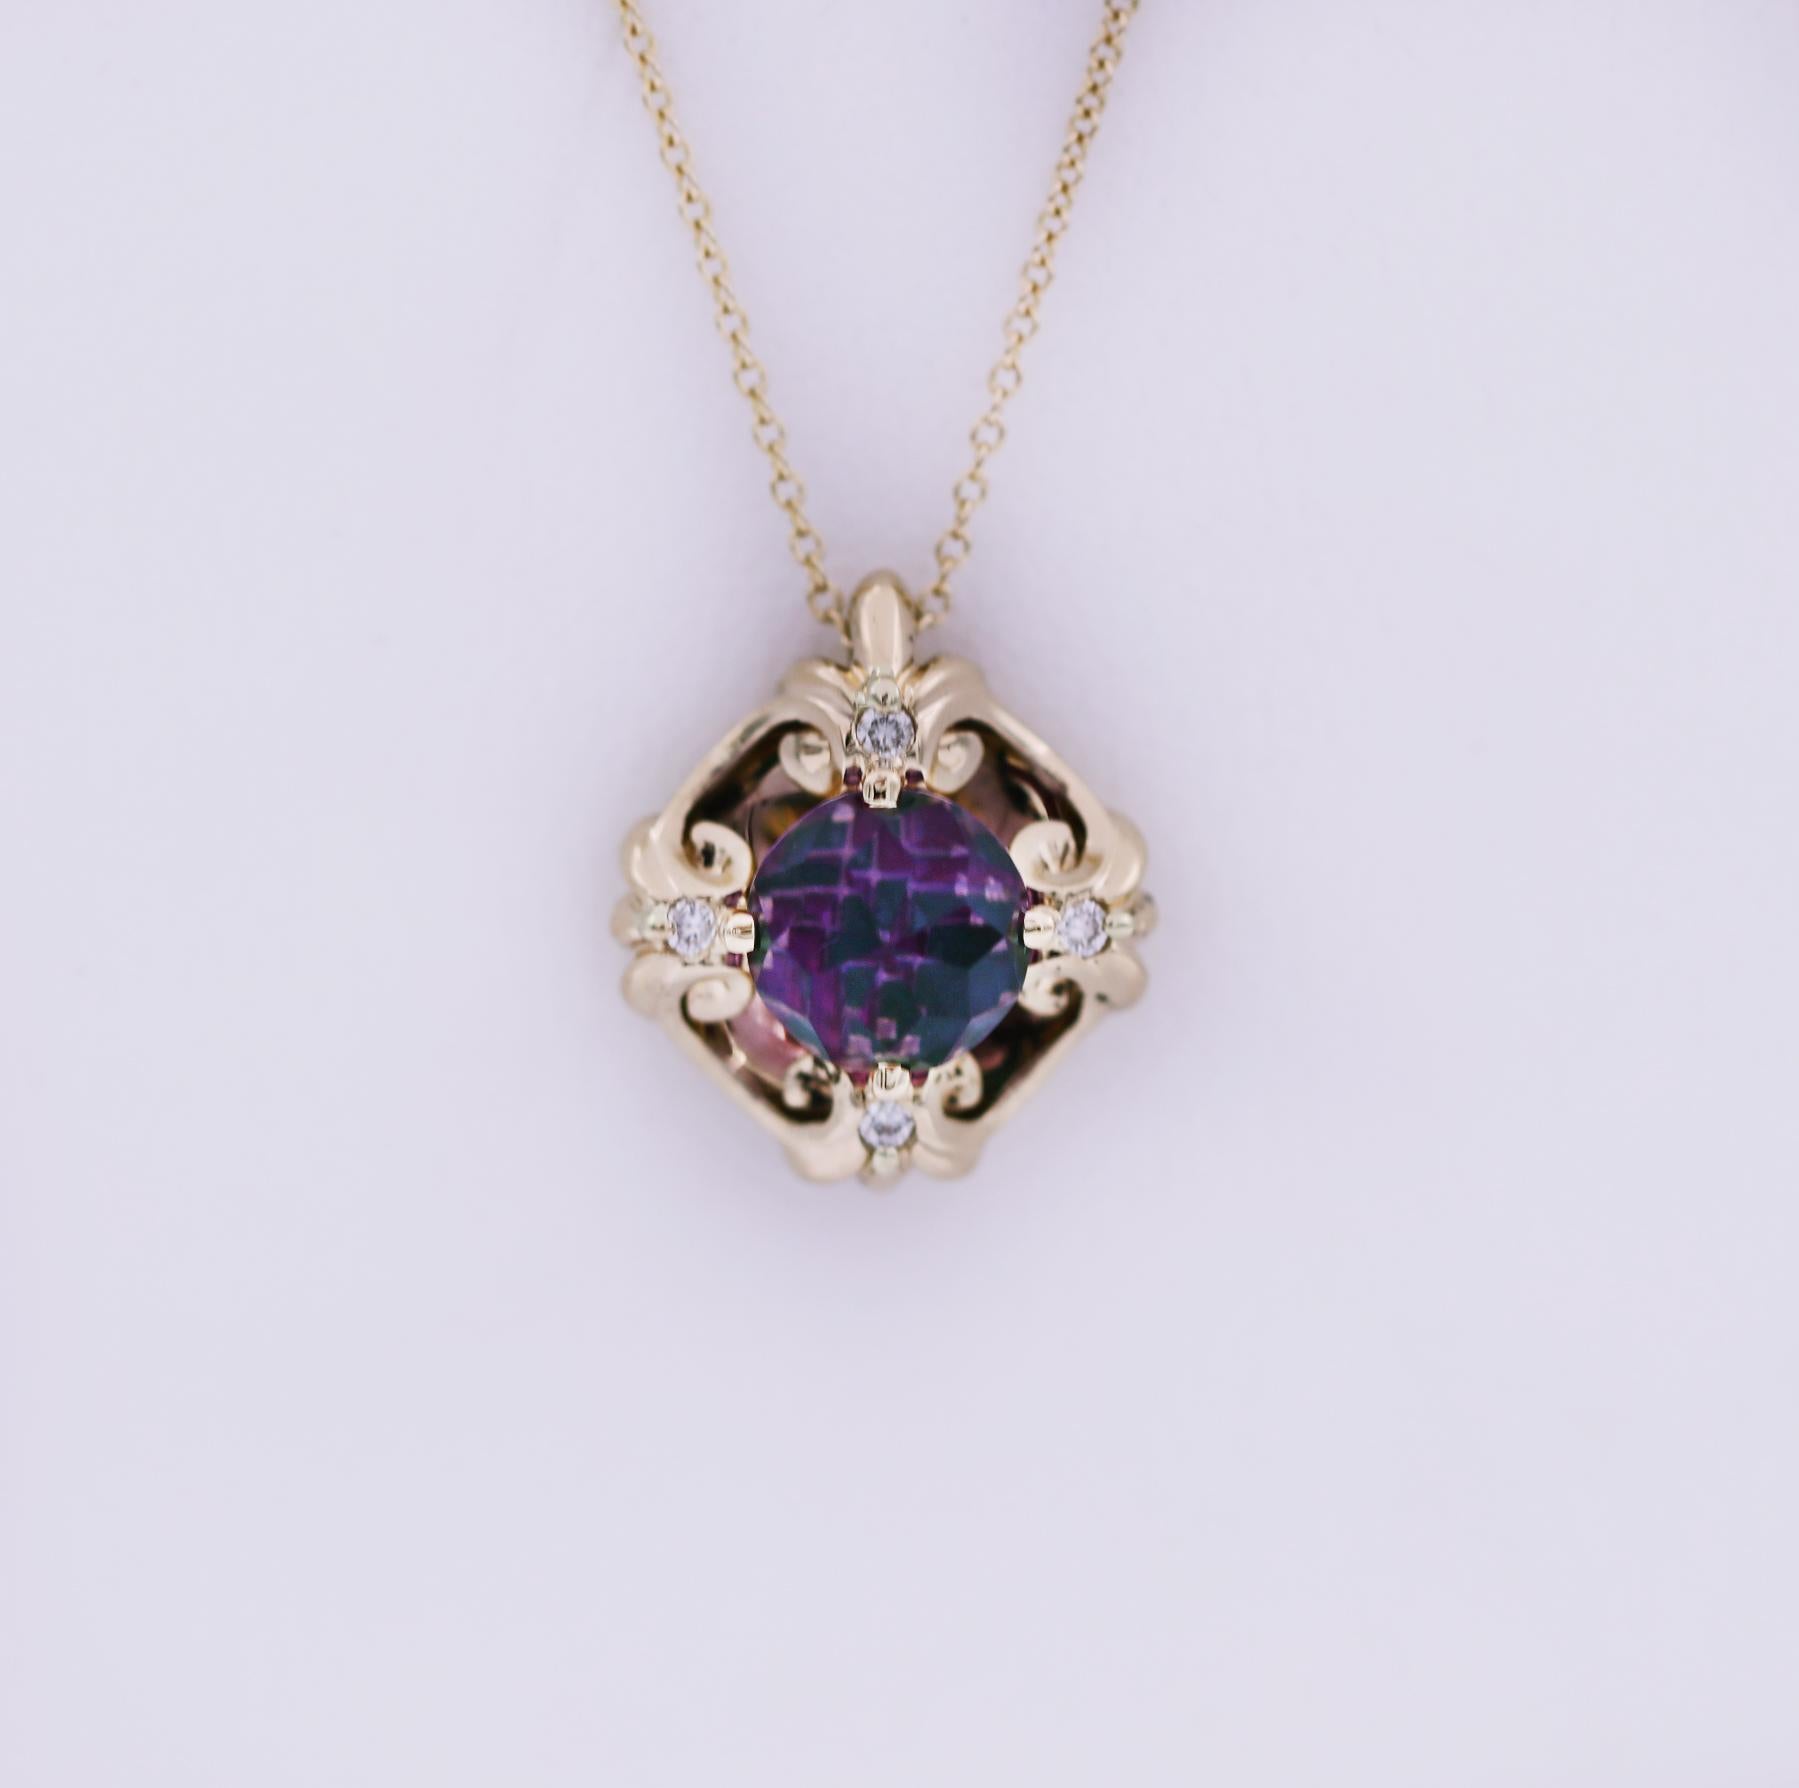 GALATEA
14 karat yellow gold necklace with an approx. 8mm “Davinchi” cut amethyst.
There are 2 rubies and 2 emeralds prong set behind the amethyst giving it a kaleidoscope effect.
Chain 18 inches long.
Pendant approx. .70